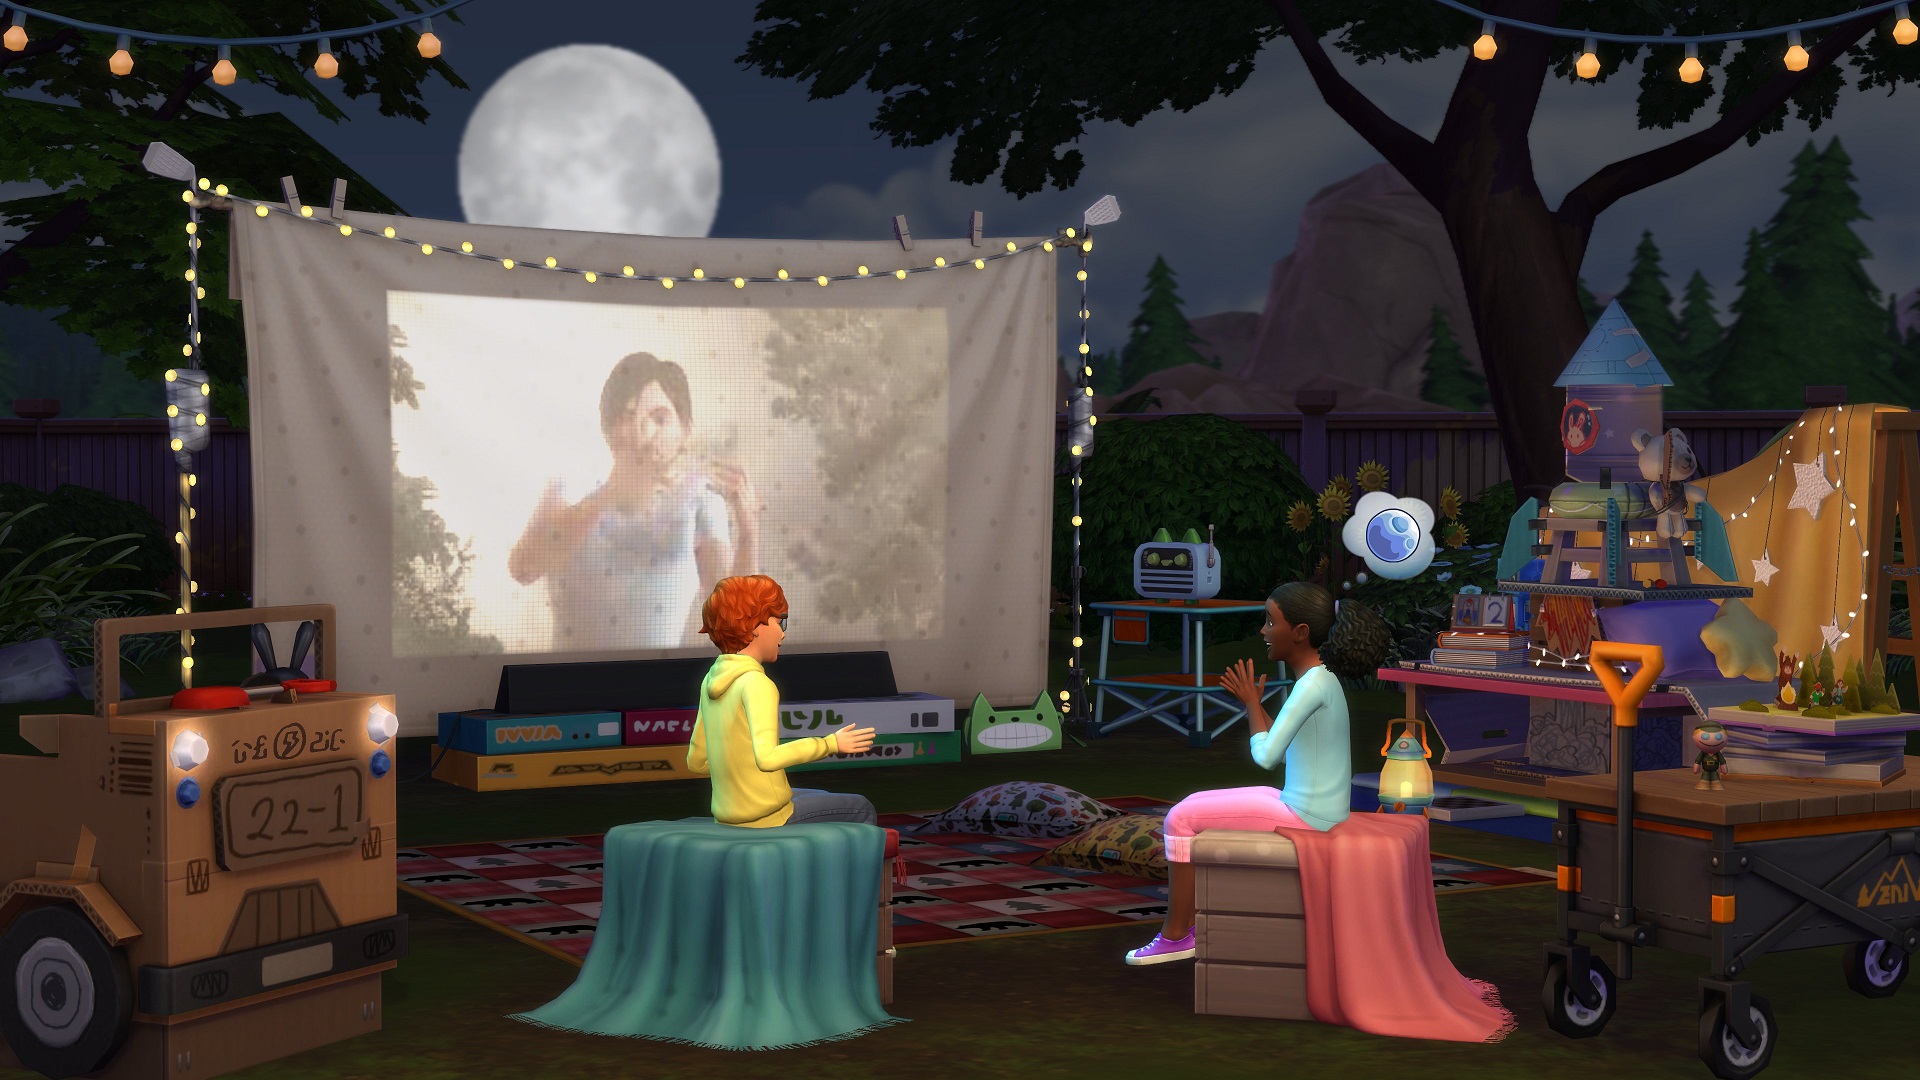 The Sims 4 reveals Little Campers and Moonlight Chic kits